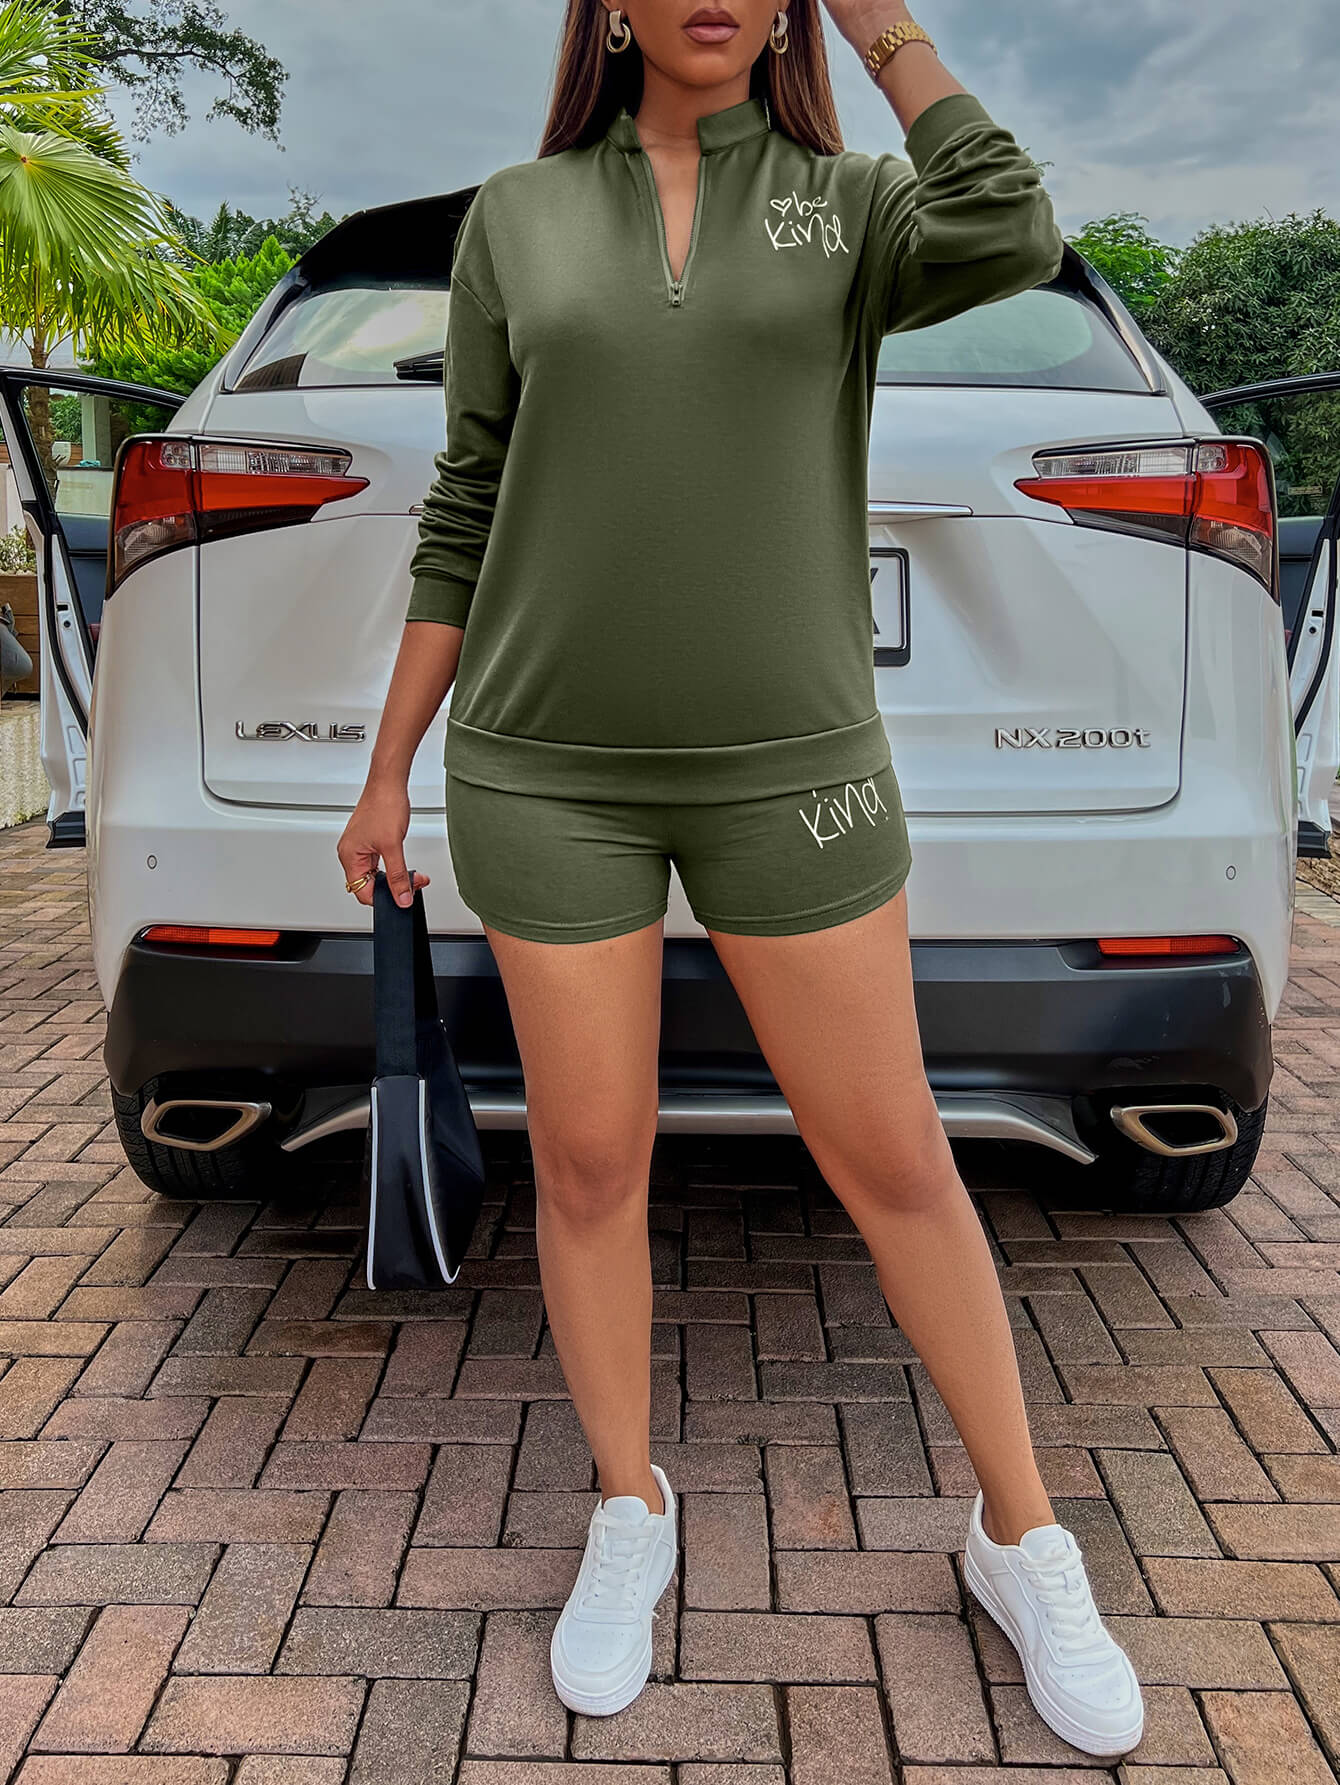 BE KIND Graphic Quarter-Zip Sweatshirt and Shorts Set - Army Green / S Girl Code